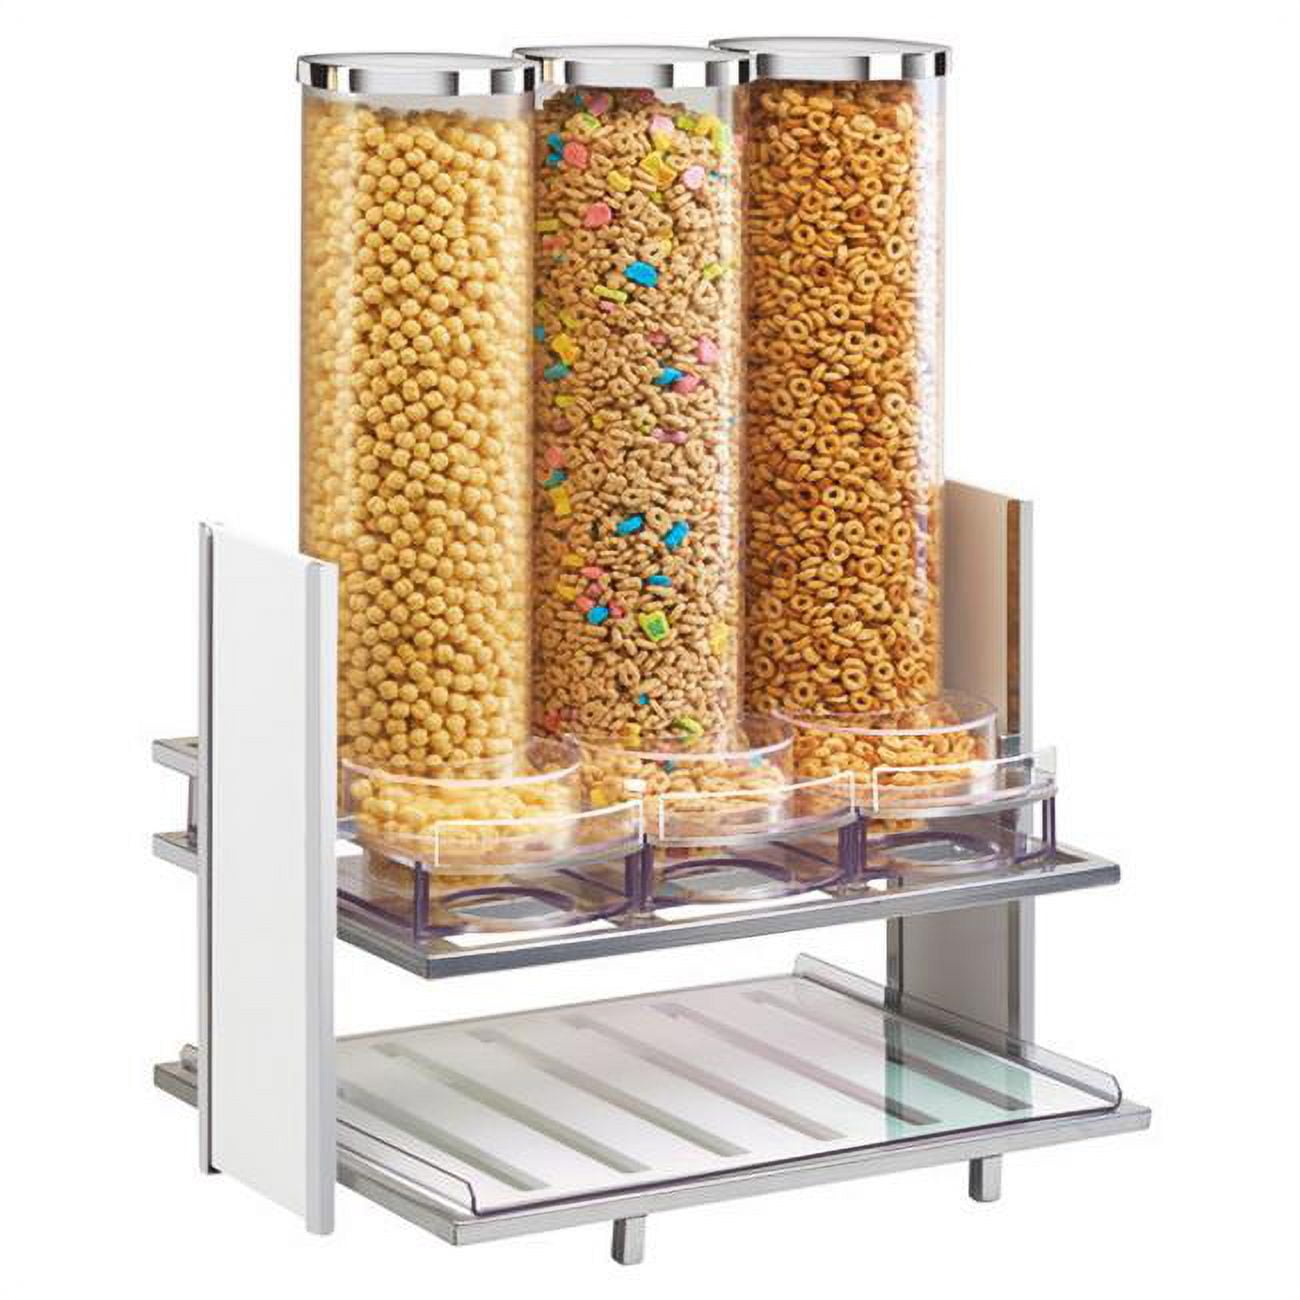 Picture of Cal Mil 1499-15 Eco Modern Cereal Dispenser - White